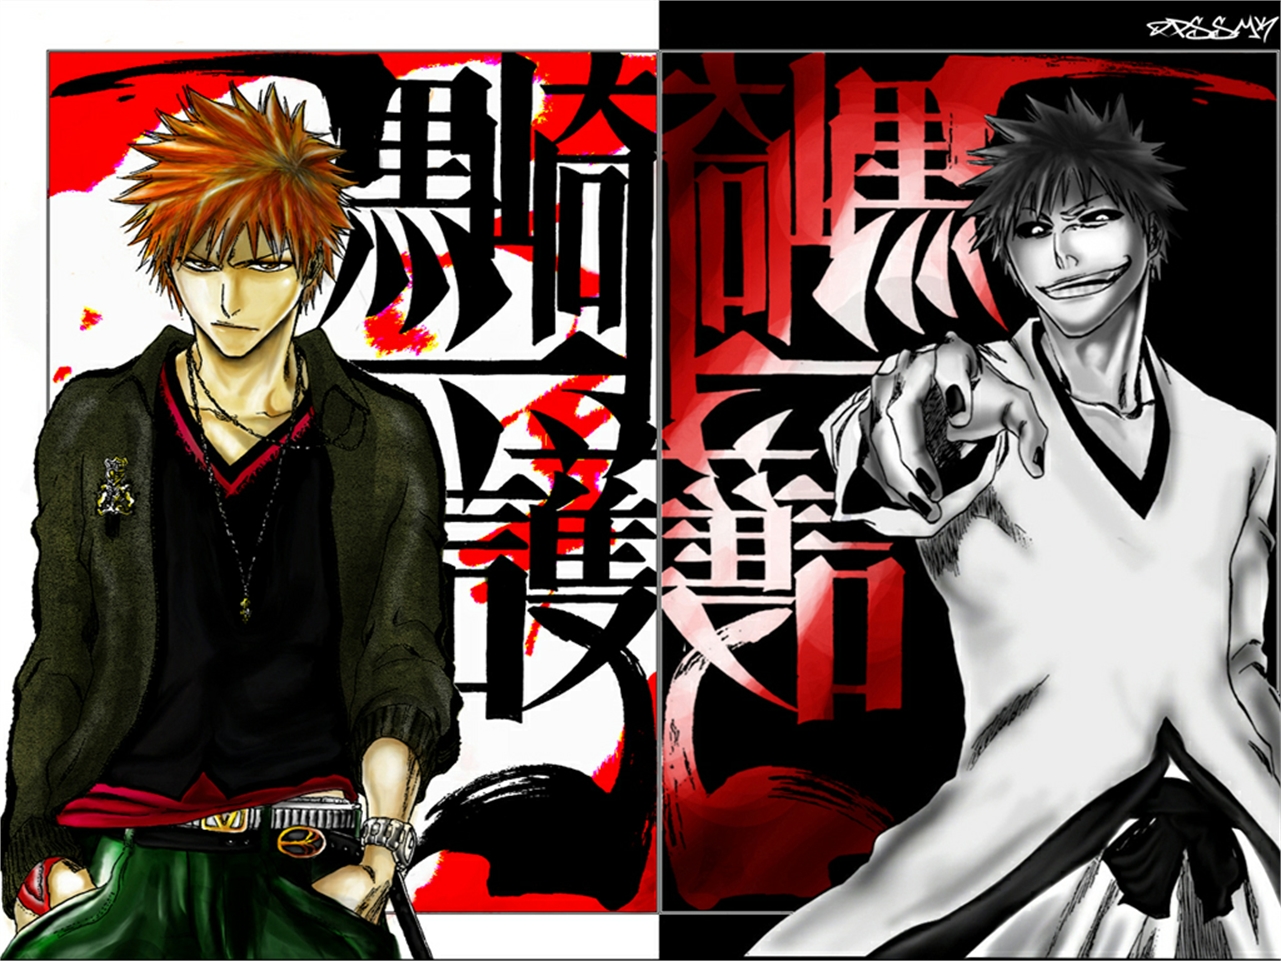 Anime Bleach Picture - Image Abyss